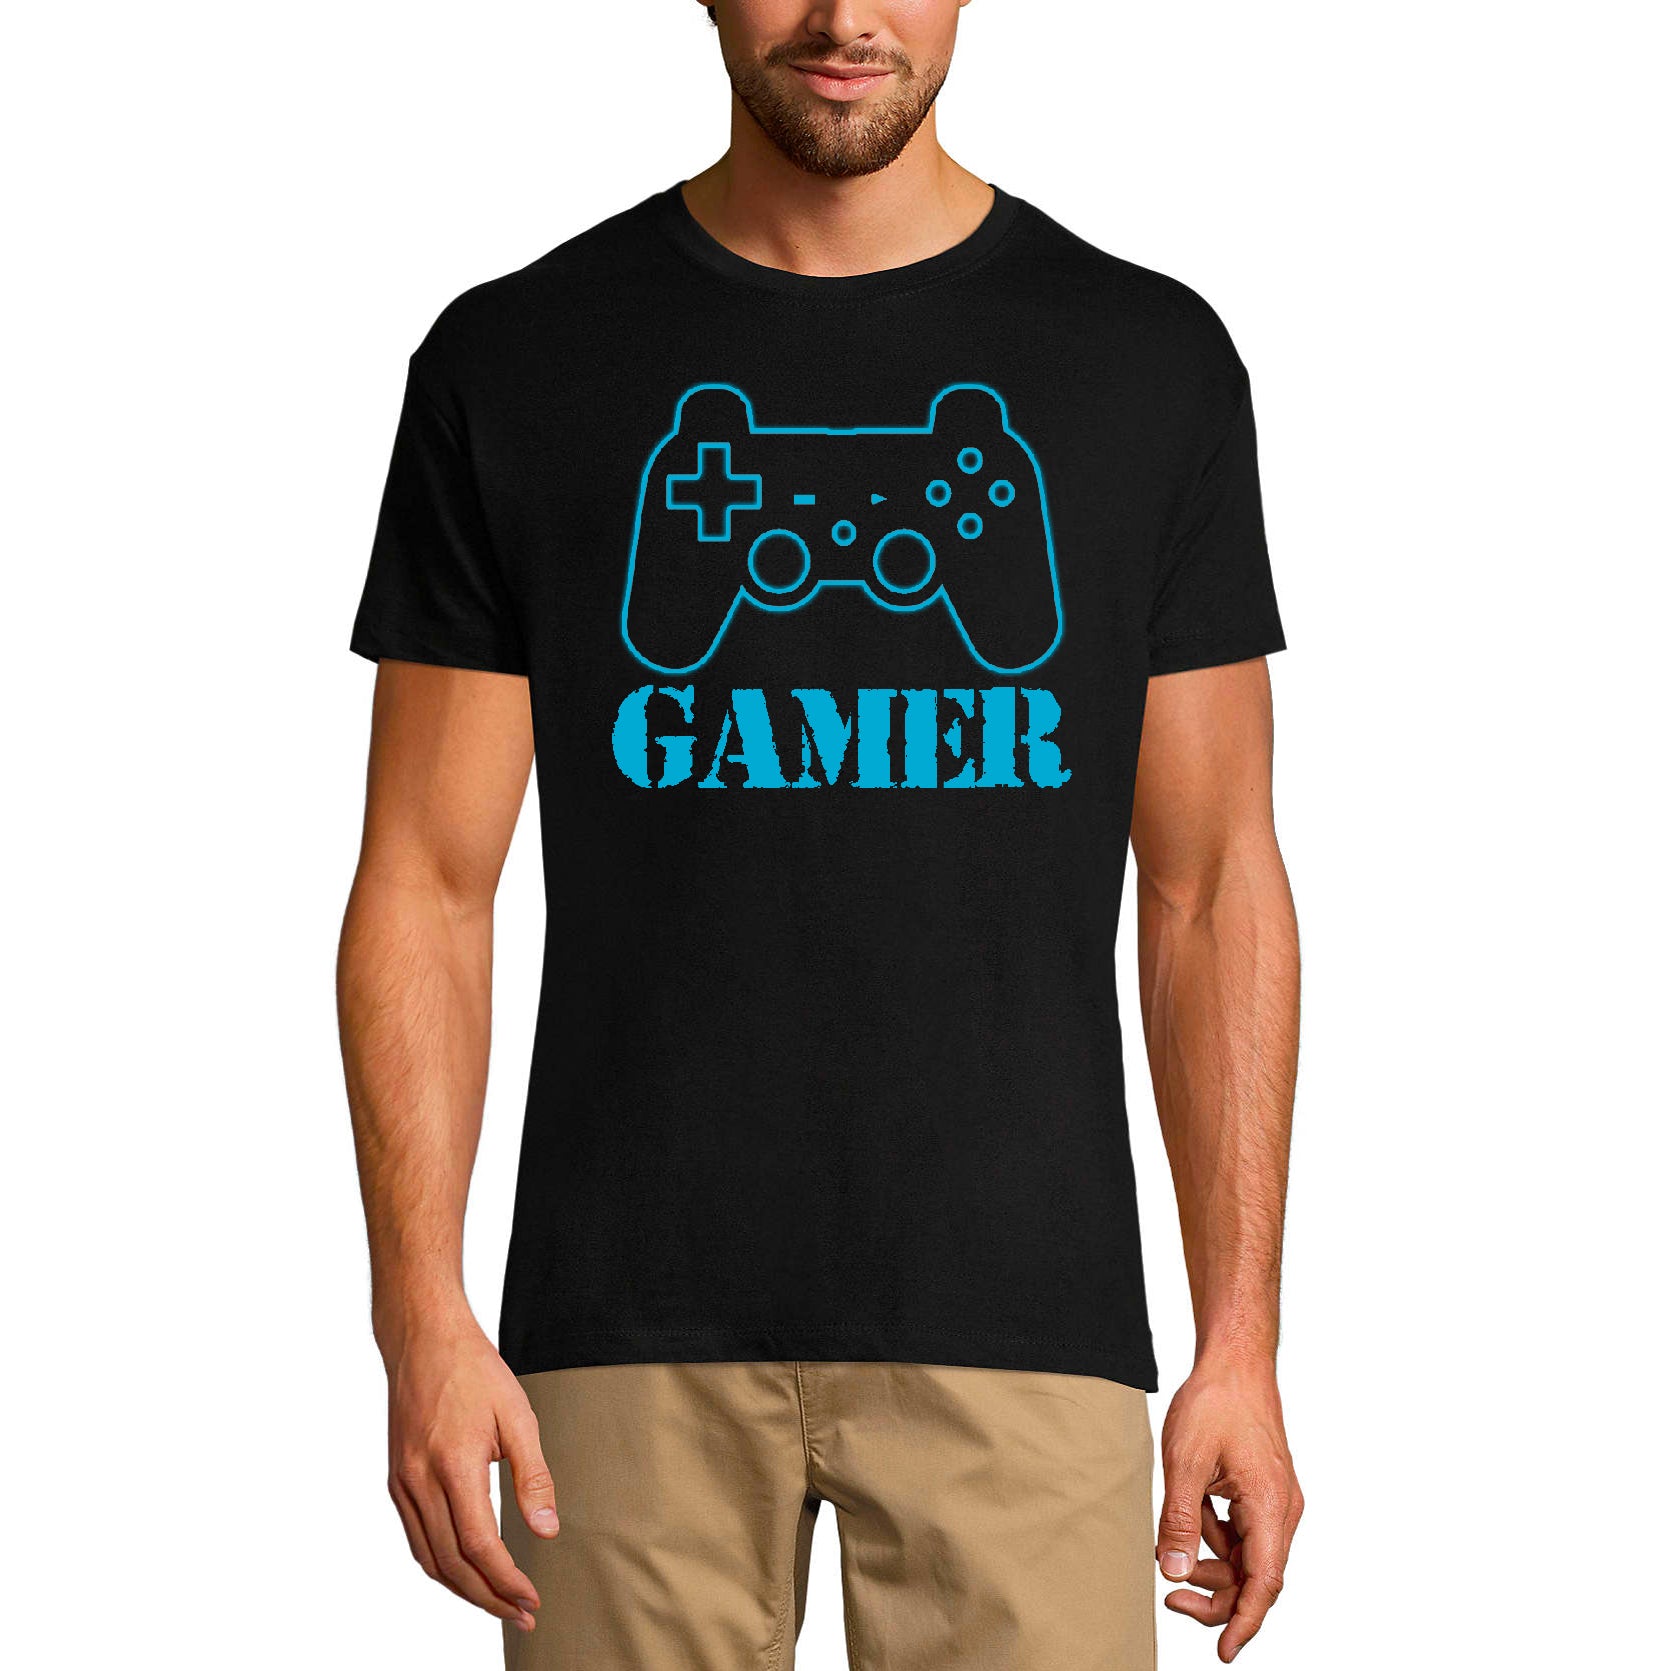 ULTRABASIC Men's Graphic T-Shirt Gamer Controller - Gaming Shirt for Adults humor joke dad gamer i paused my game alien player ufo playstation tee shirt clothes gaming apparel gifts super mario nintendo call of duty graphic tshirt video game funny geek gift for the gamer fortnite pubg humor son father birthday